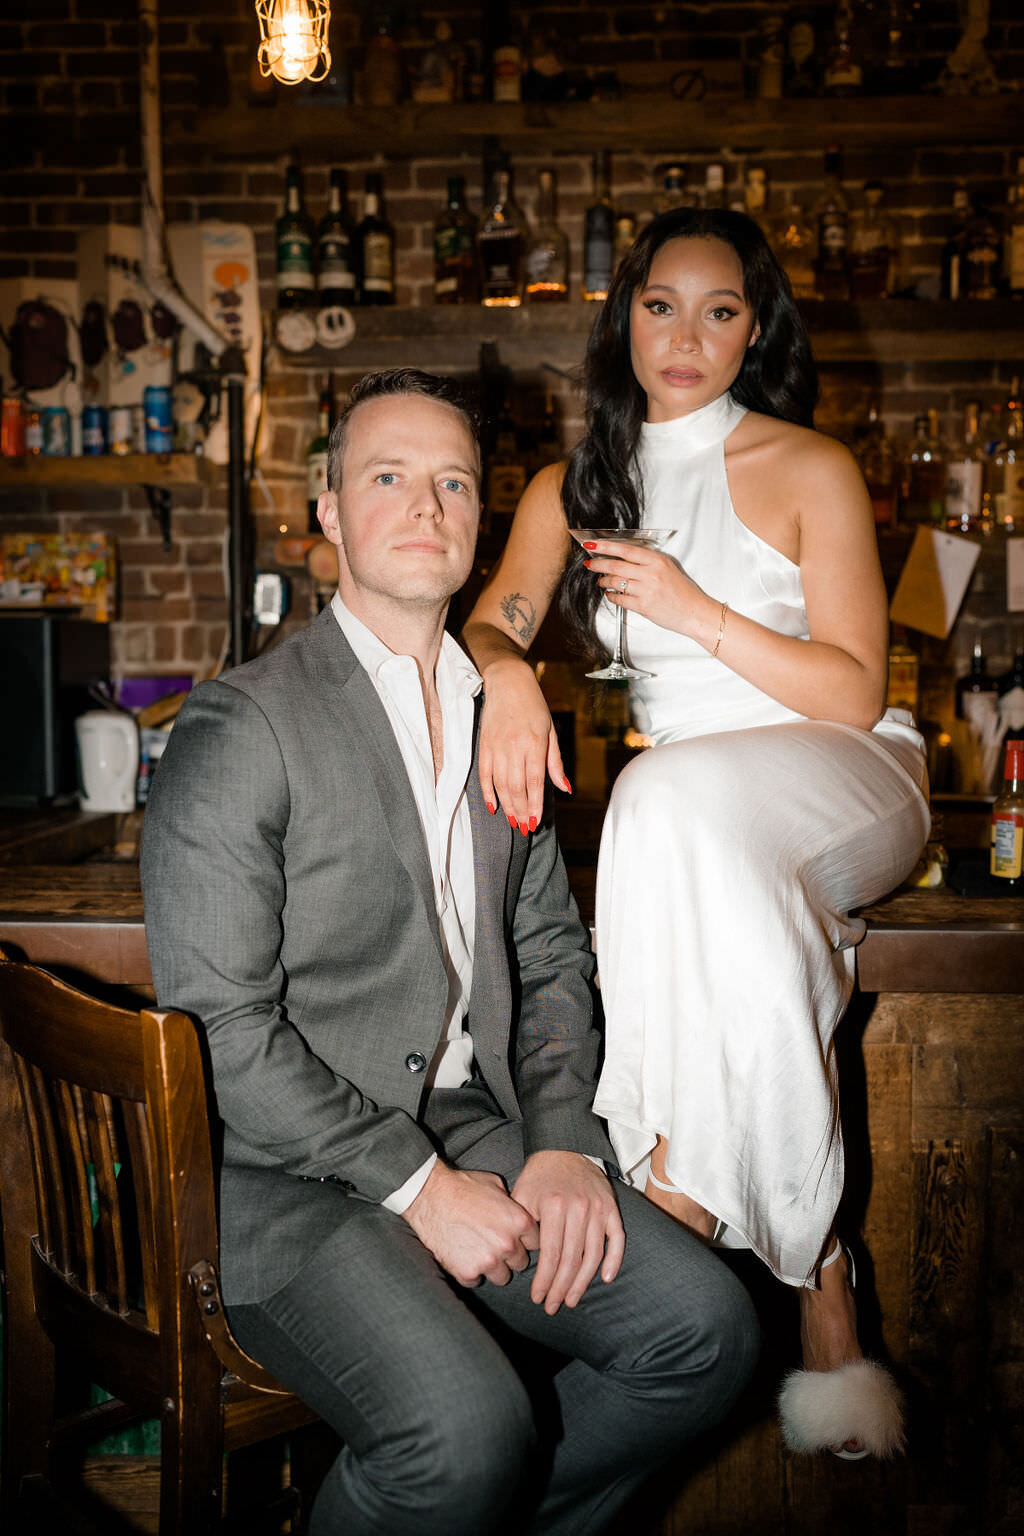 bride and groom posing at a bar while the bride sits on the bar holding a drink